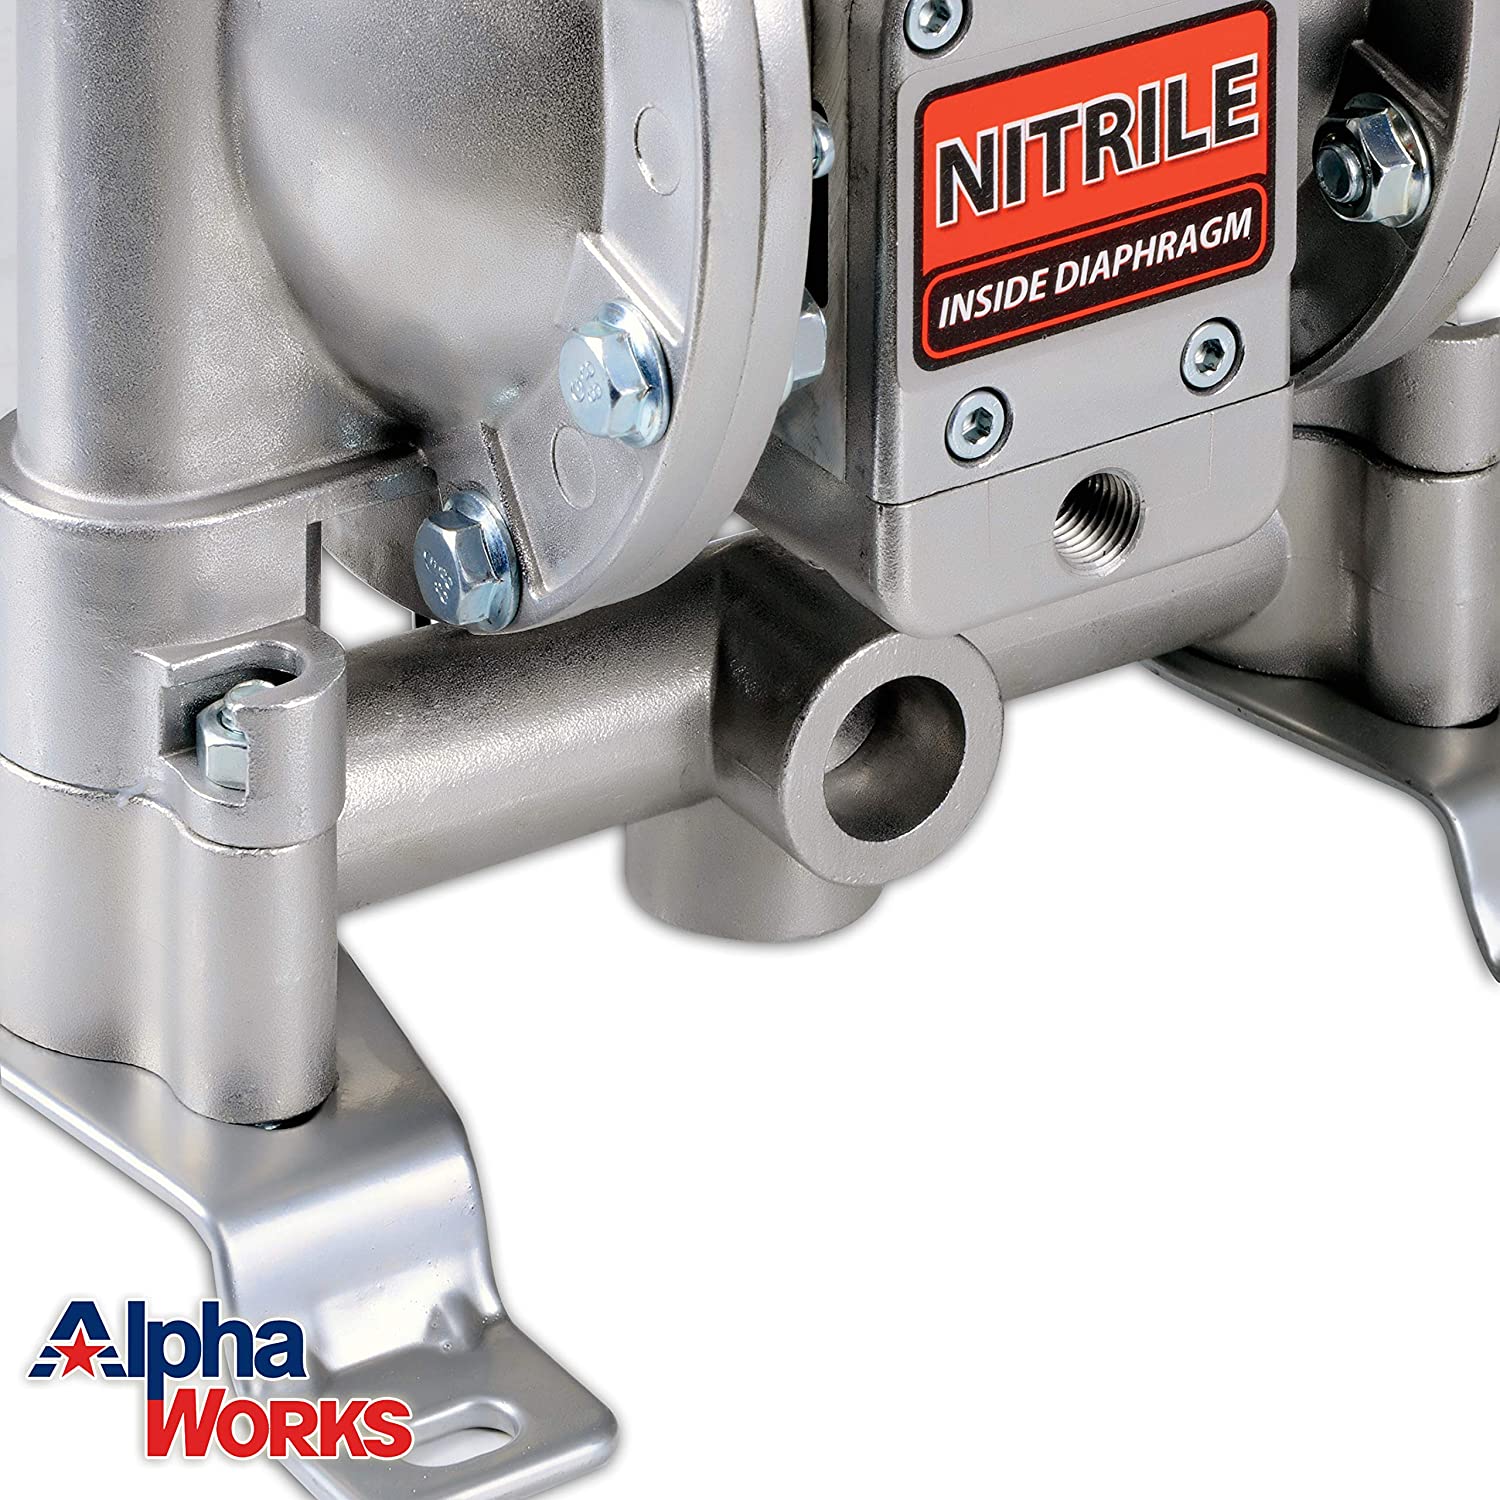 Alpha Works GUF014 12GPM 1/2" In/Out 1/4" NPT Air Inlet Air Powered Nitrile Double Diaphragm Transfer Pump New